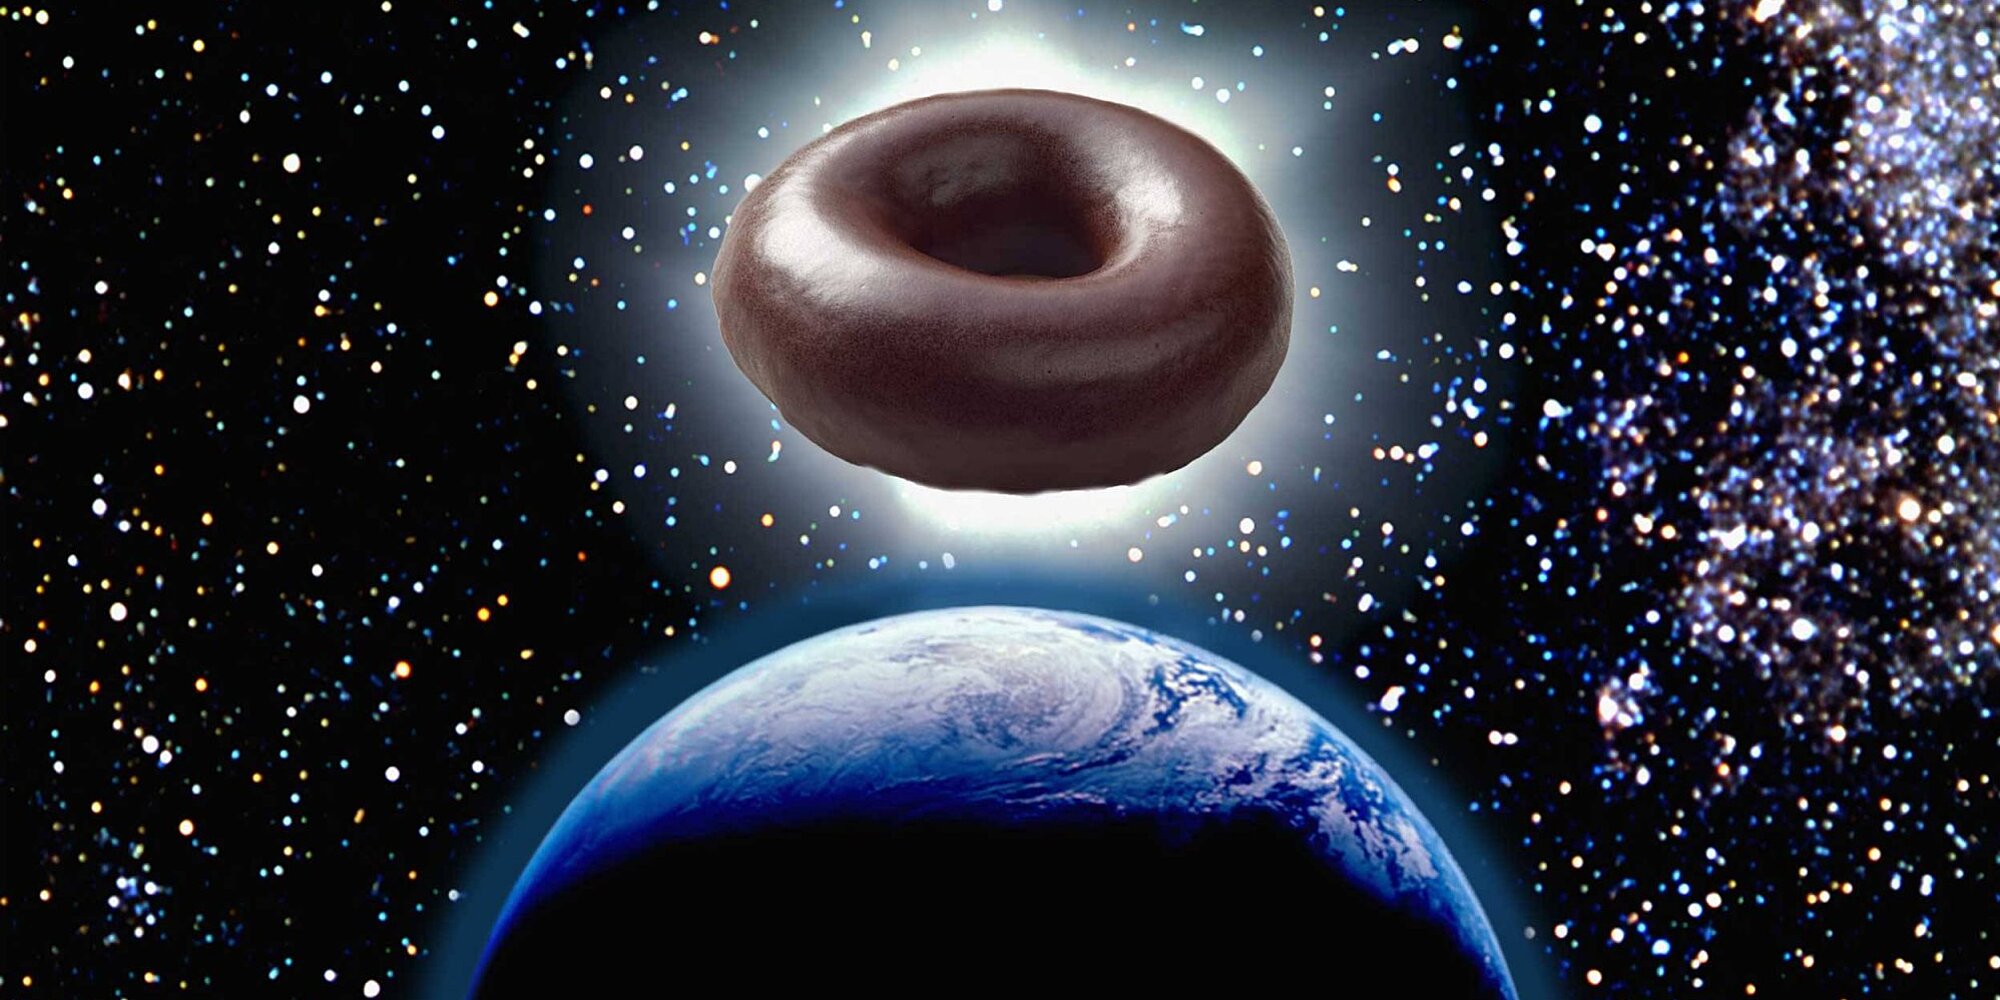 Krispy Kremes Solar Eclipse Doughnuts Are Covered In Chocolate Myrecipes